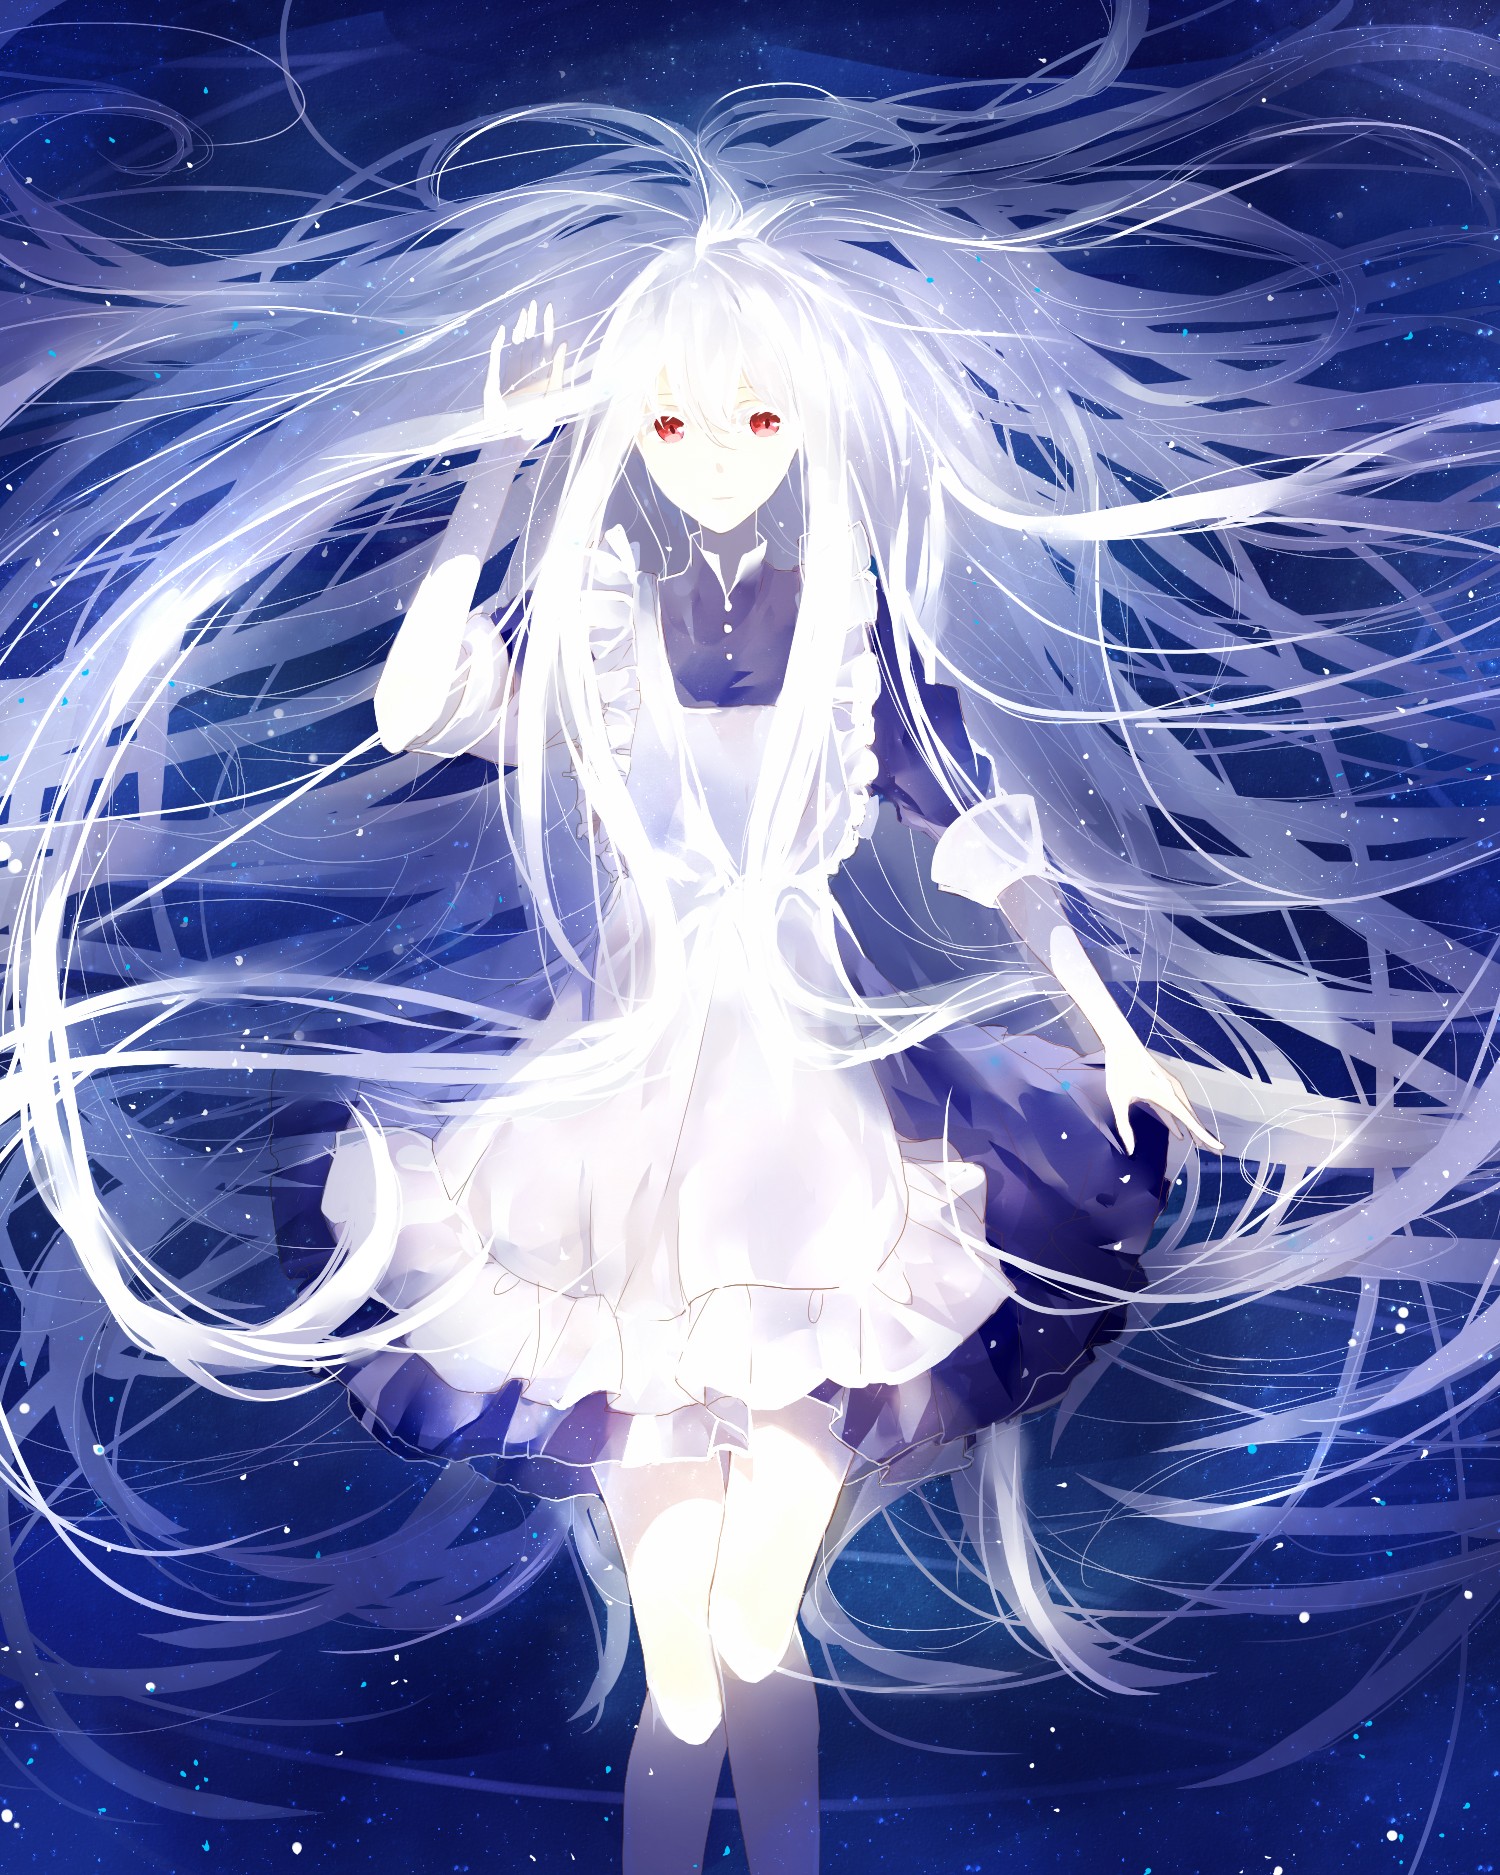 Top 99 Background Images Anime Character With White Hair And Blue Eyes Sharp